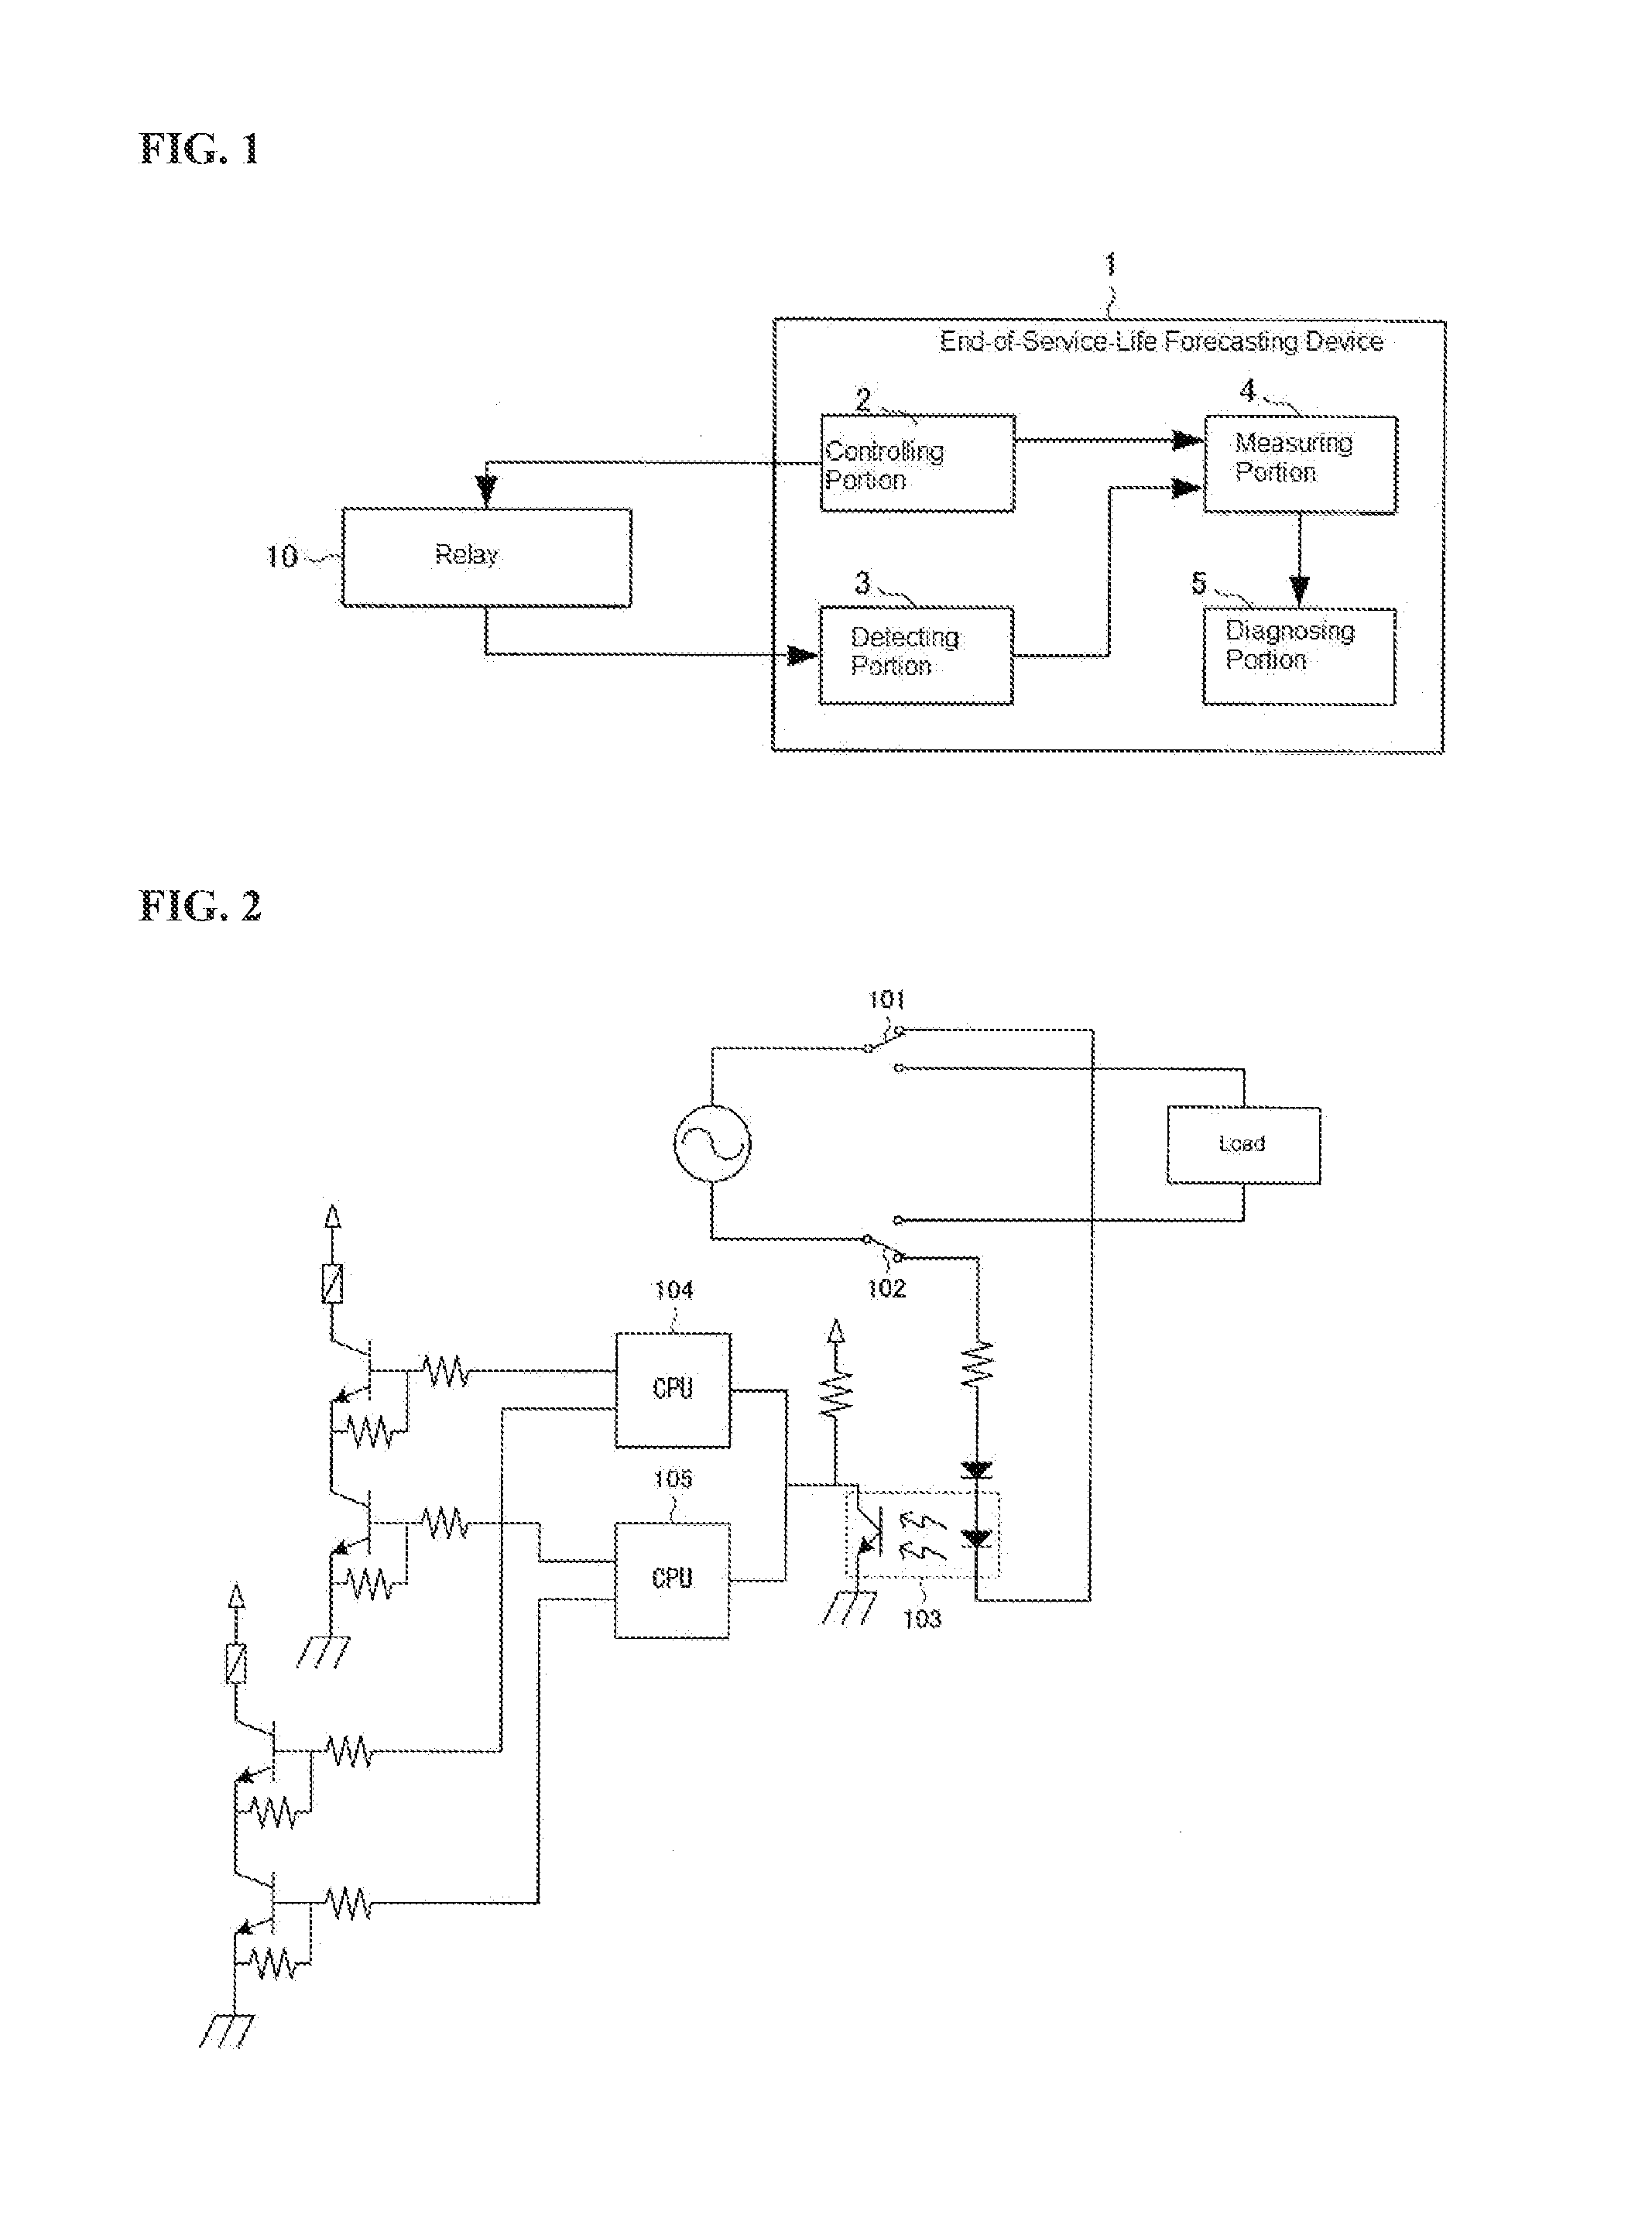 Relay end-of-service-life forecasting device